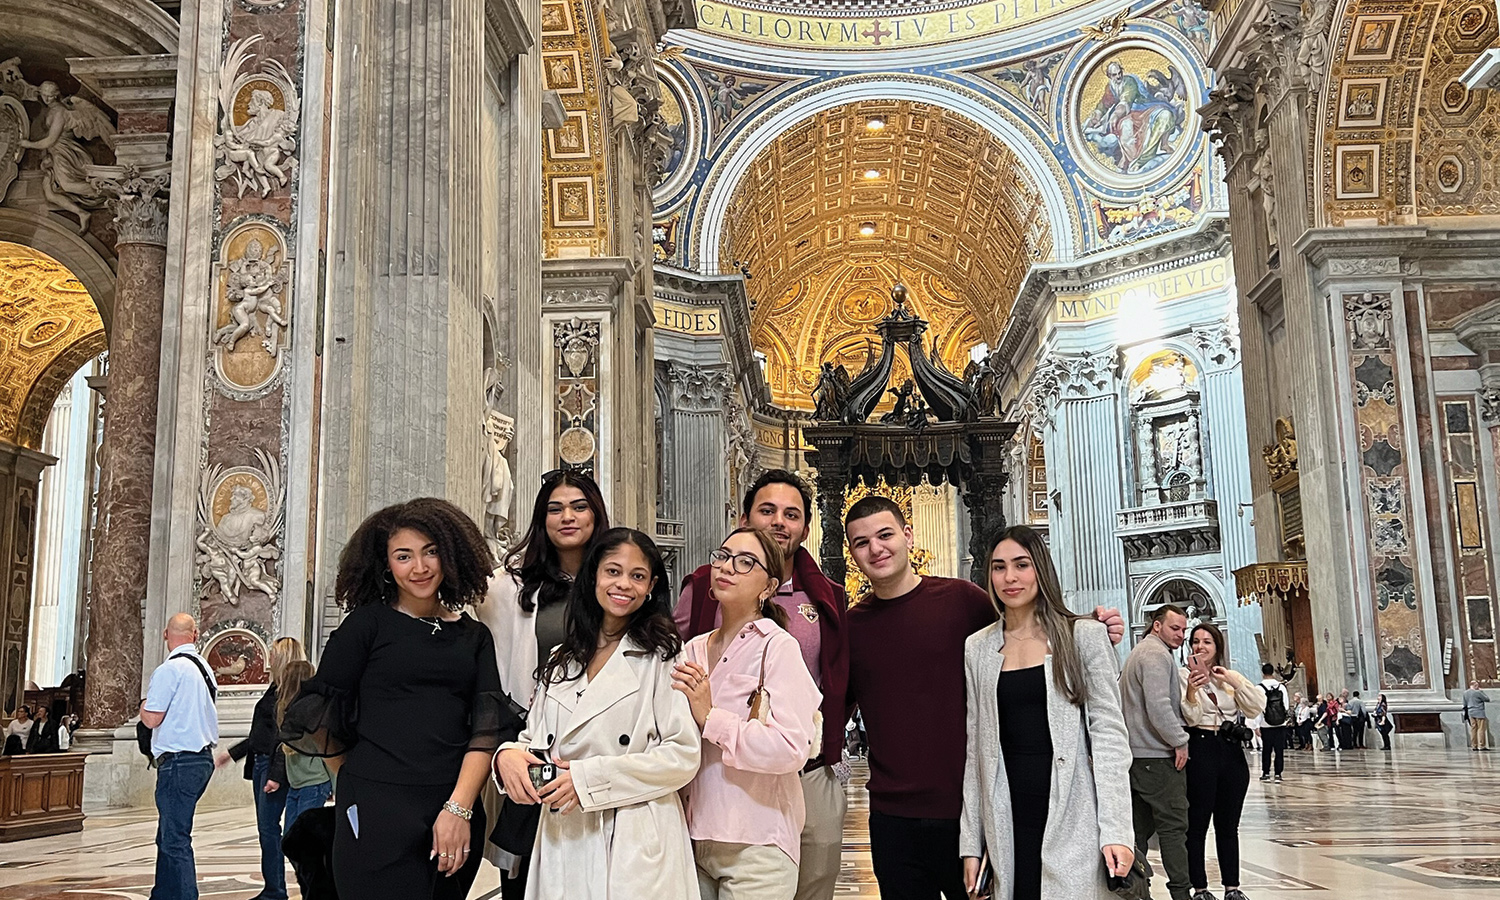 Students visited Saint Peter’s Basilica in Vatican City during their travels through Rome and Milan, Italy.